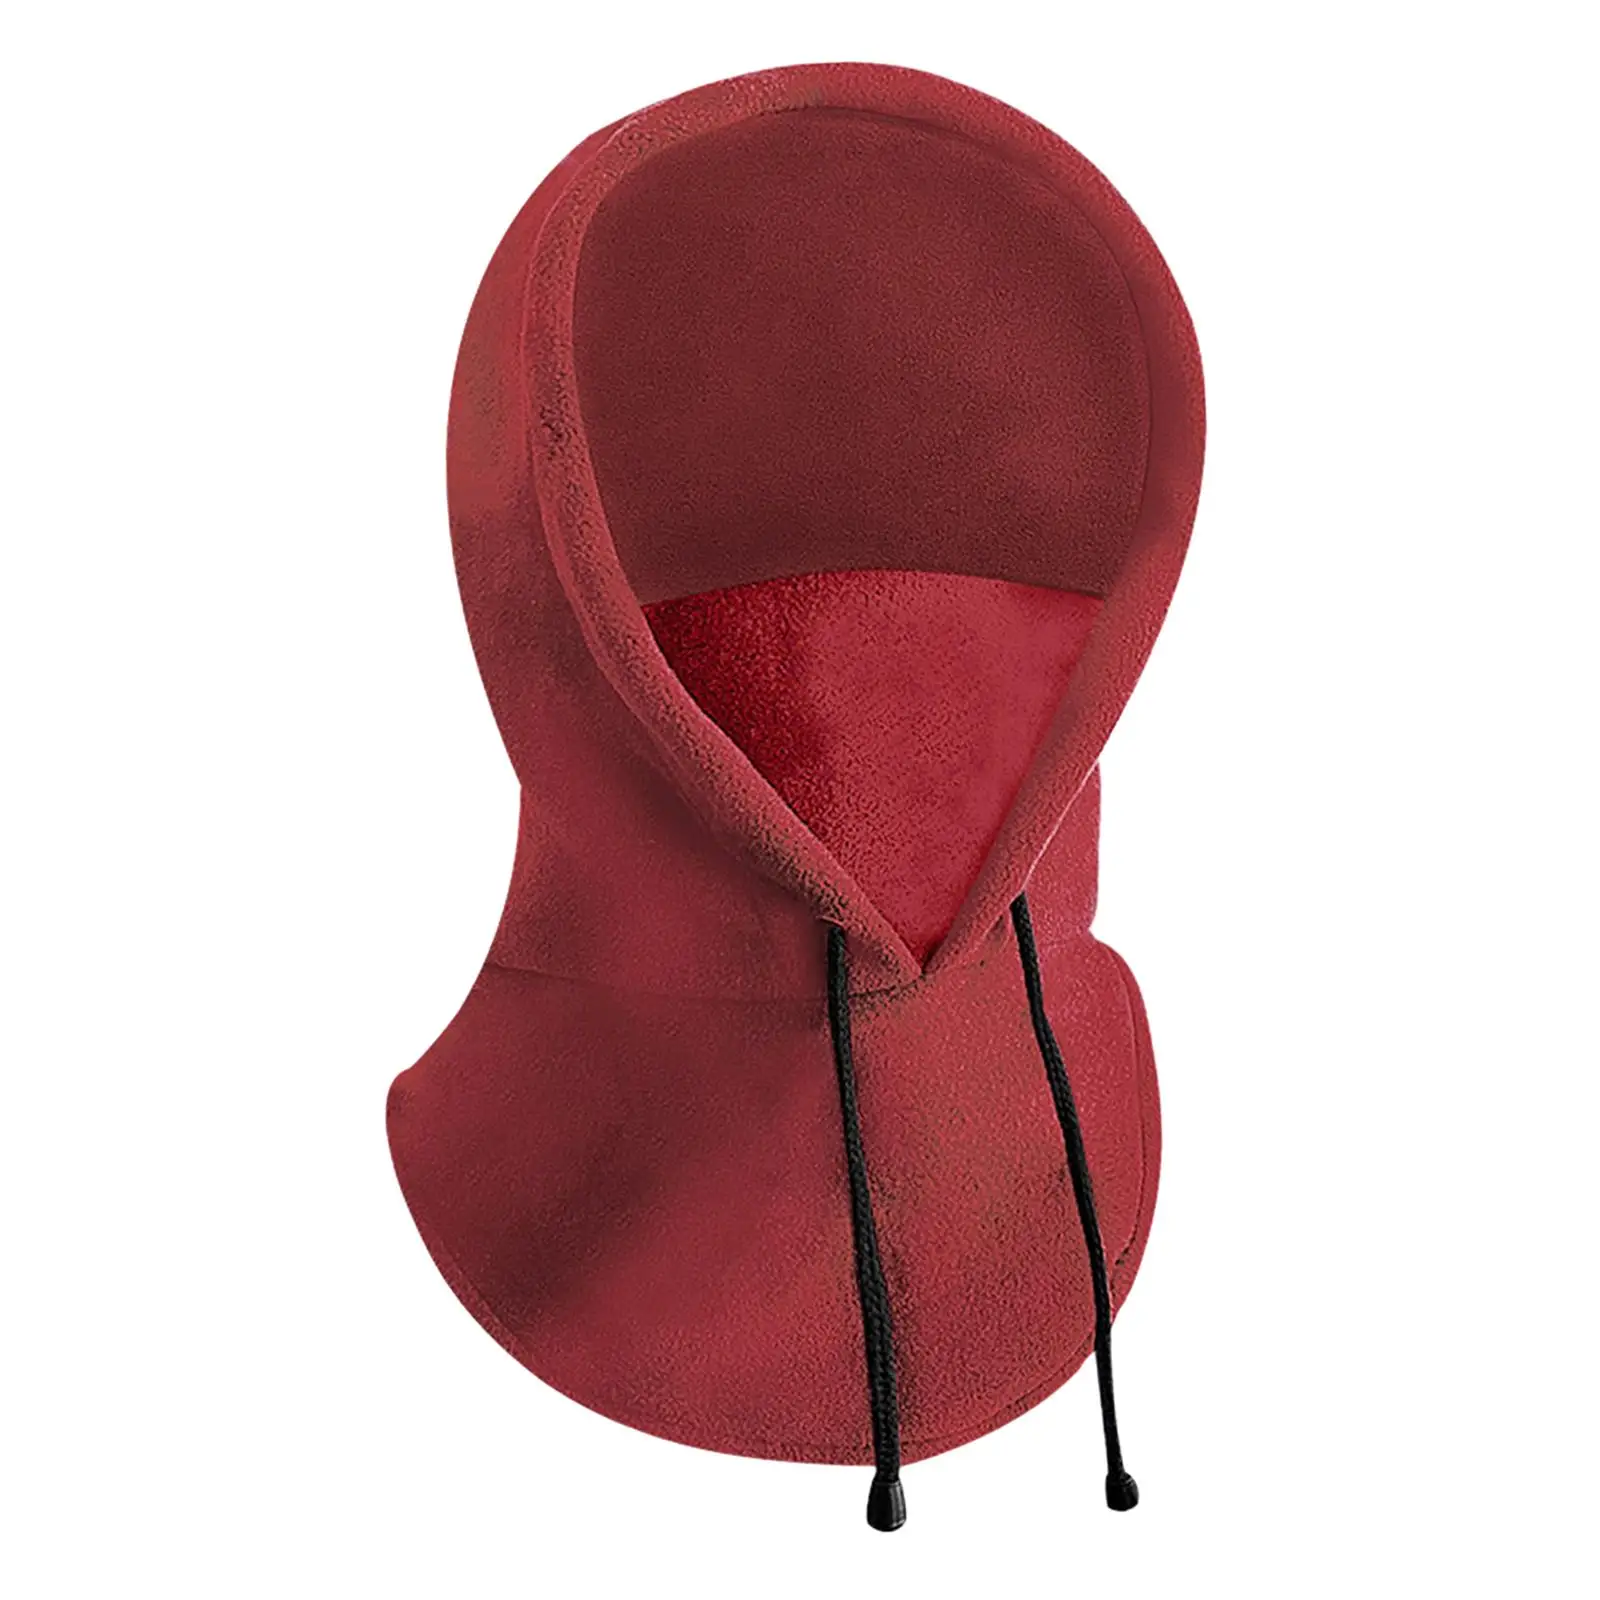 Winter Sports Cap Breathable Adjustable Easy to Use Windproof Accessories Wind Resistant Winter Face Cap Ski Cap for Women Men